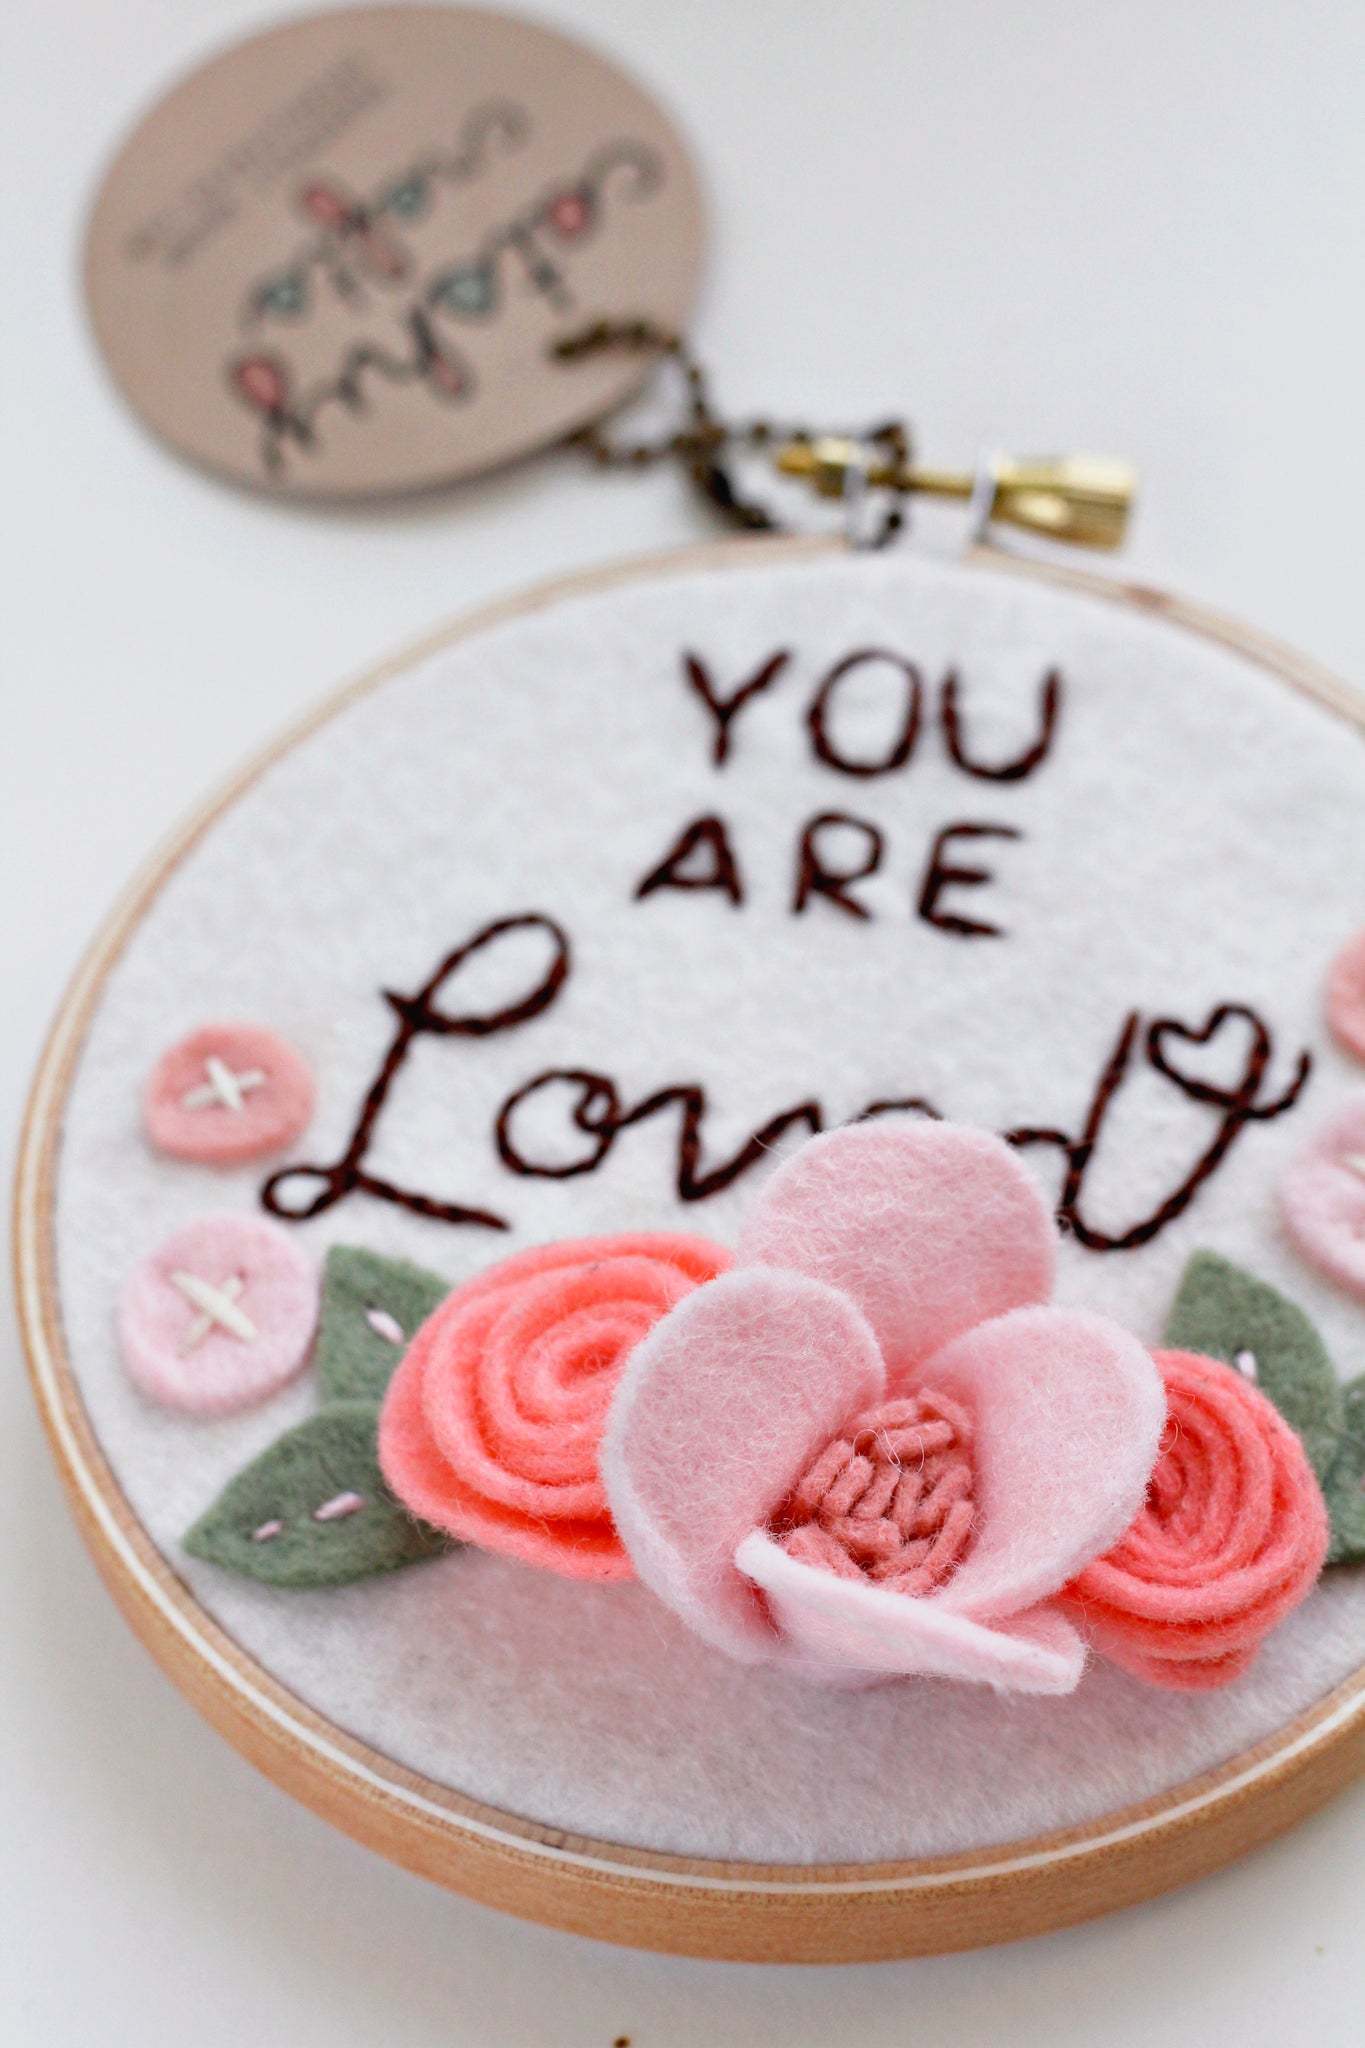 All You Need is Love - Floral Embroidery Hoop Art 